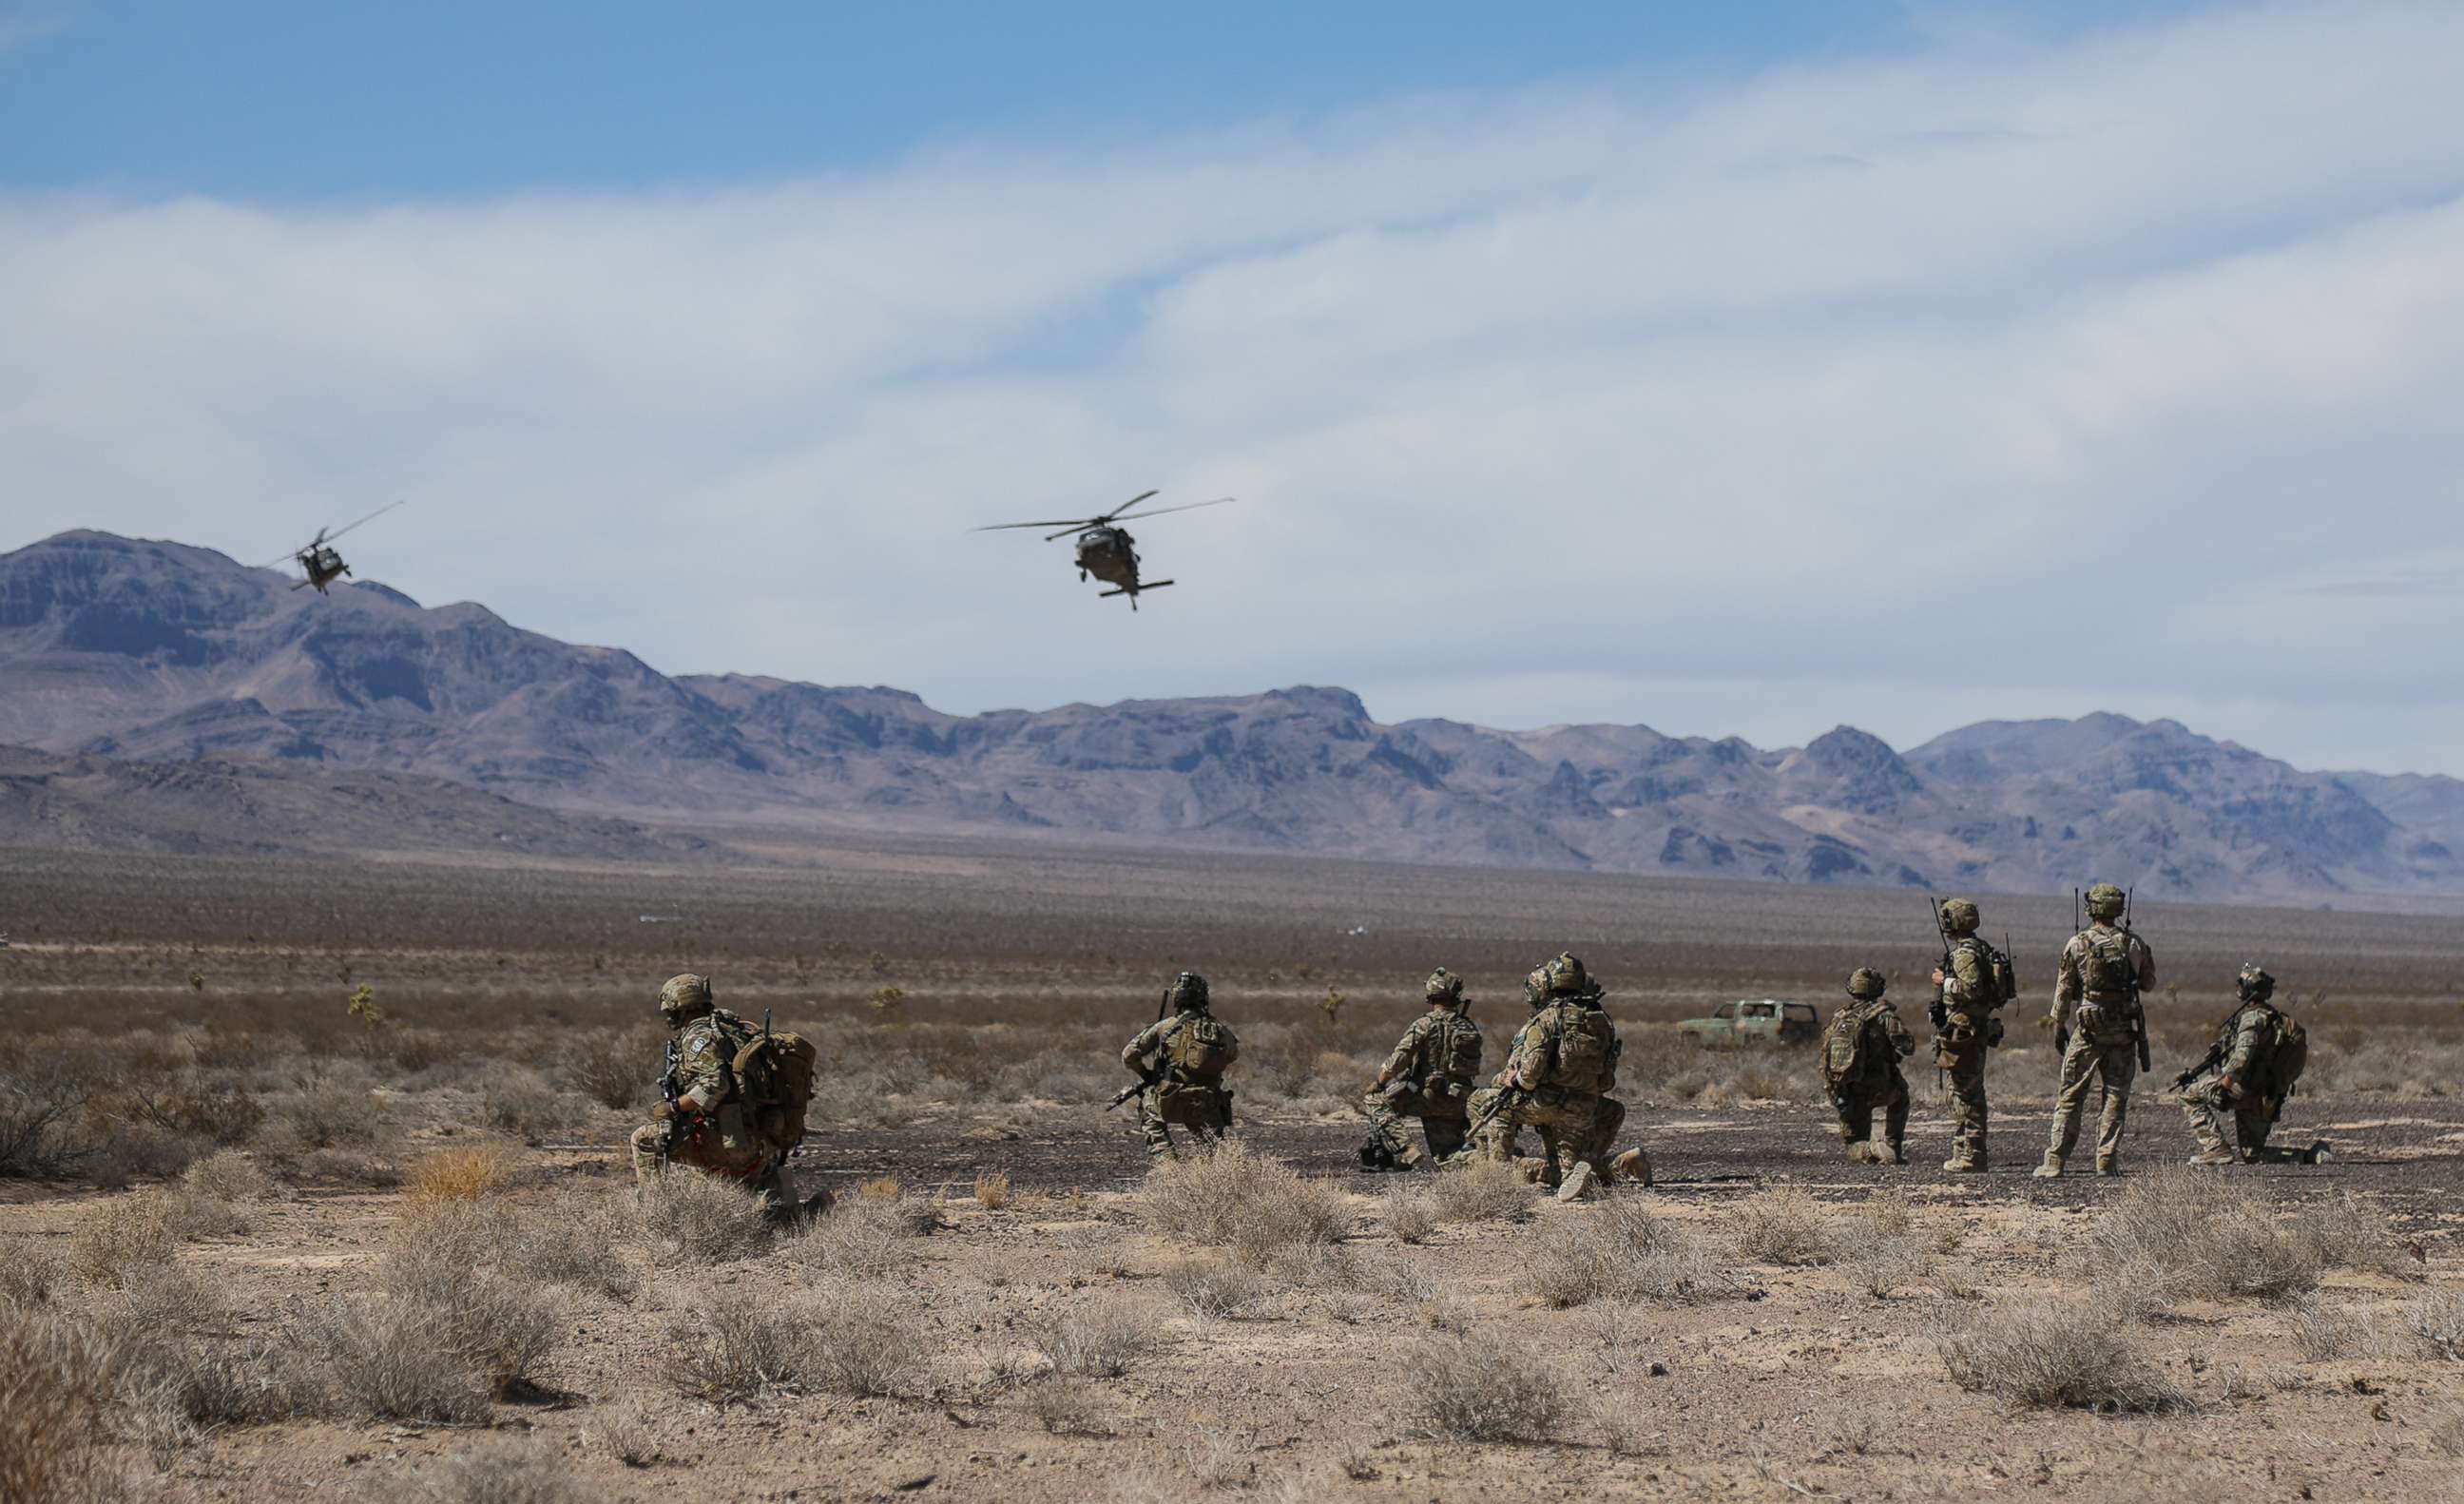 PHOTO: U.S. Special Forces Soldiers and Airmen from the 99th Civil Engineer Squadron EOD team and 66th Rescue Squadron, watch as two UH-60 Blackhawk helicopters land at the Nevada Test and Training Range near Nellis AFB, Nevada, Aug. 28, 2018.